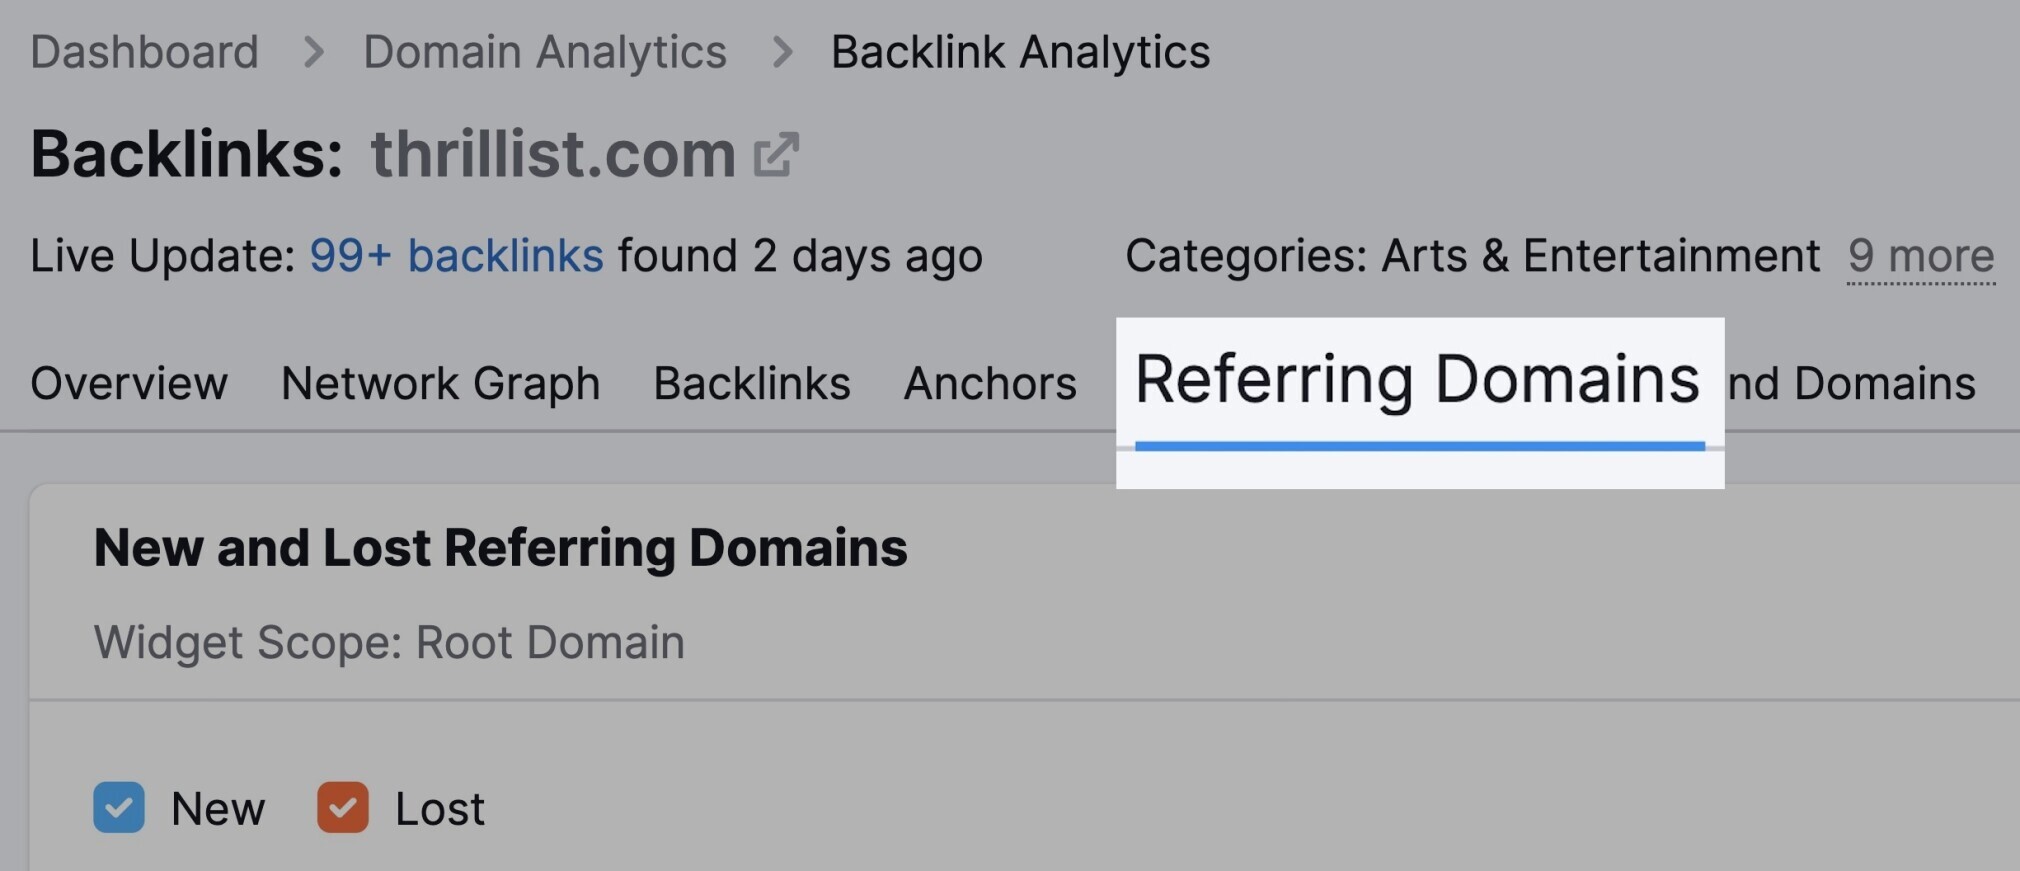 referring domains in backlink analytics